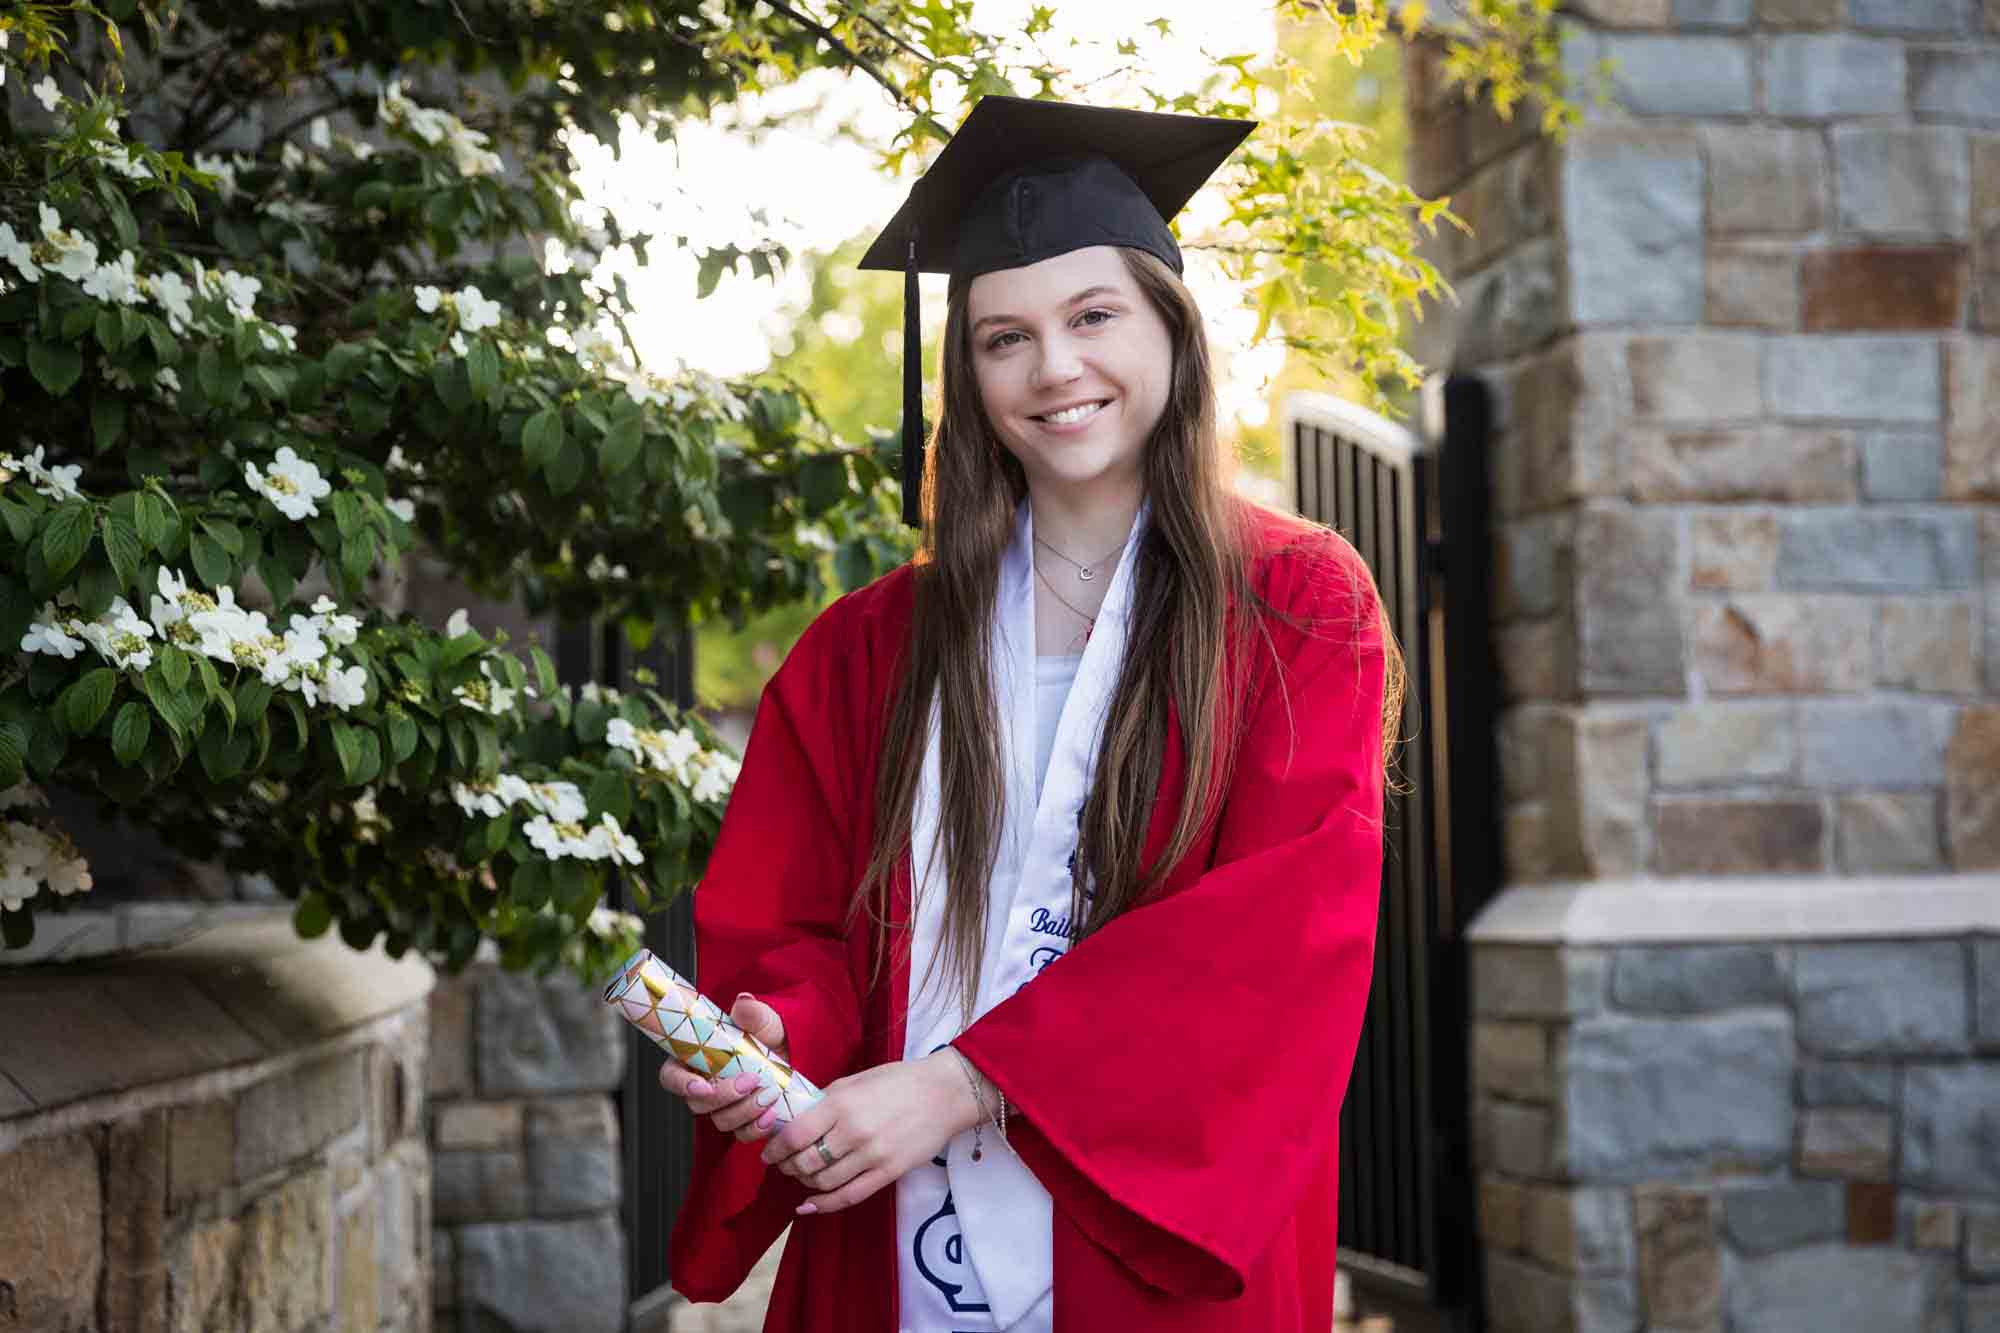 Female graduate holding colorful can in front of gate and dogwood bush during a St. John’s University graduate portrait session